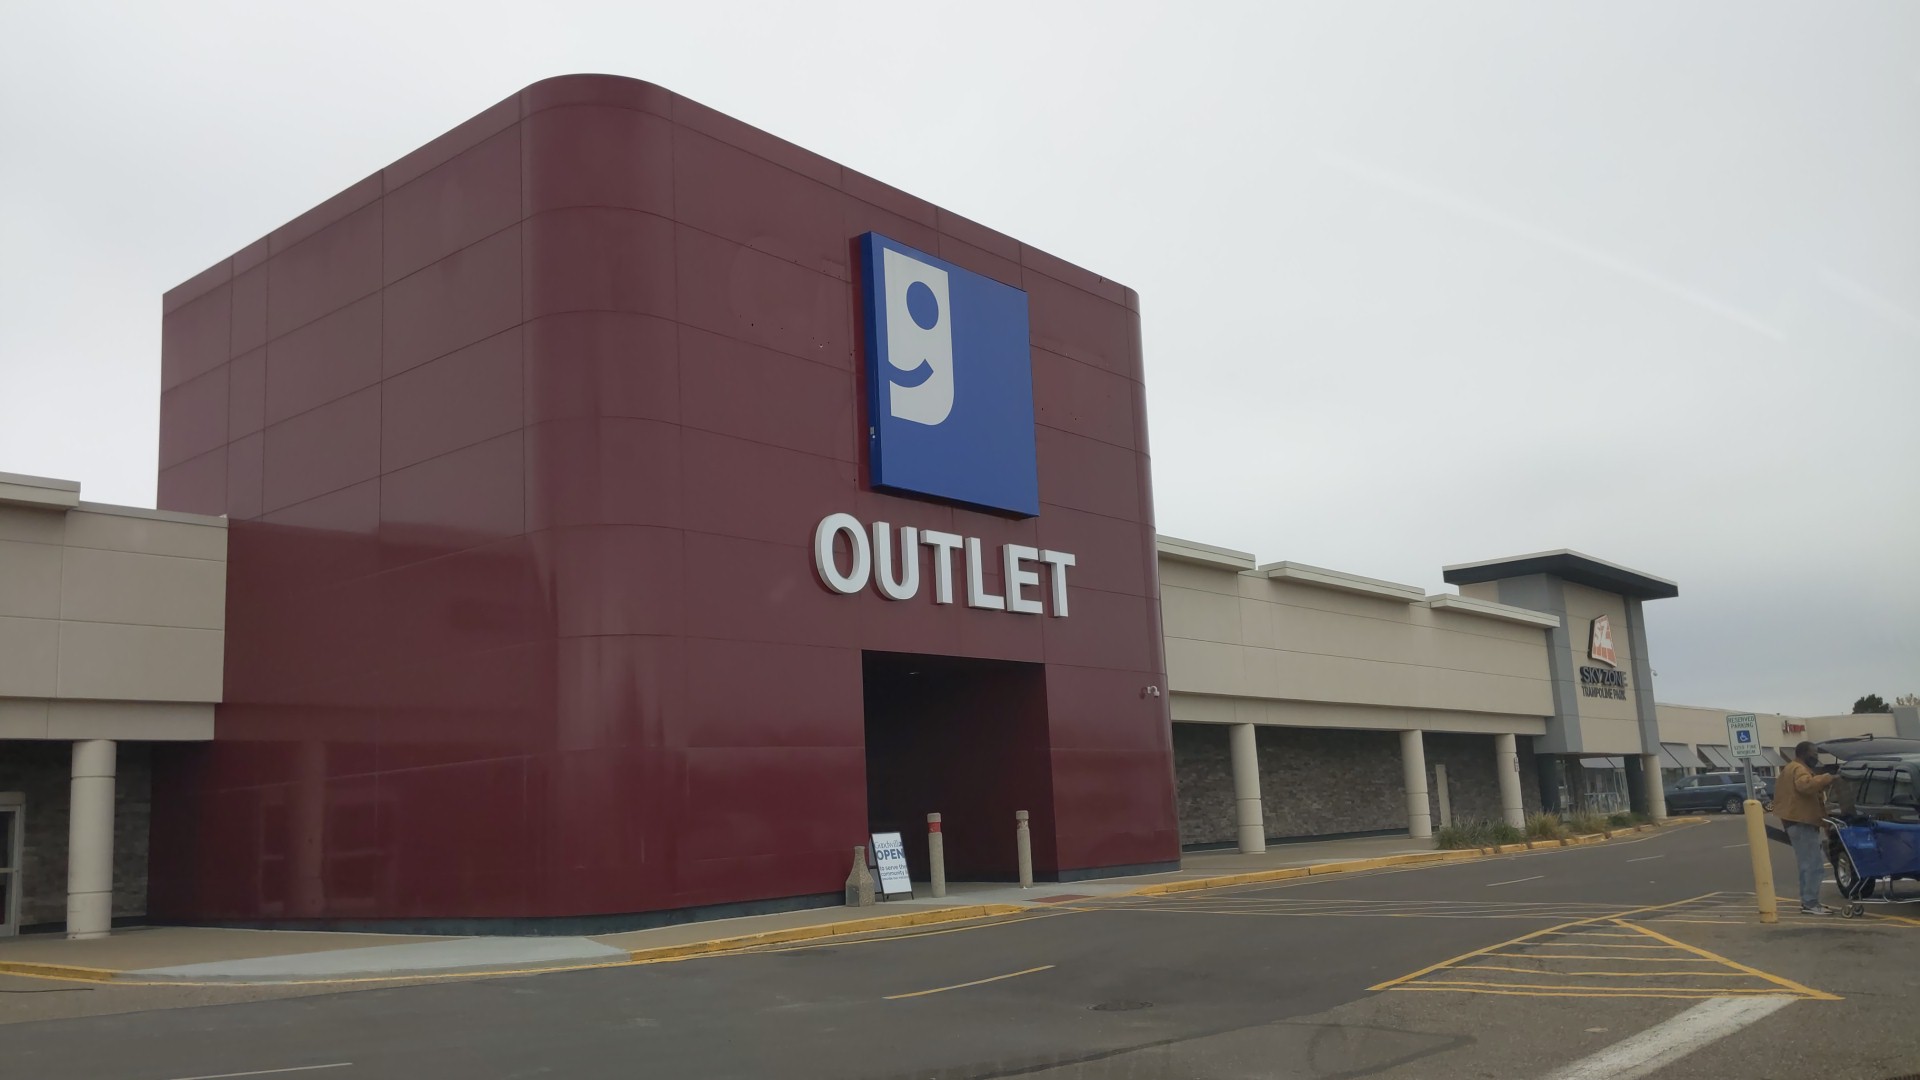 Outlet - Goodwill Industries of Greater Cleveland & East Central Ohio